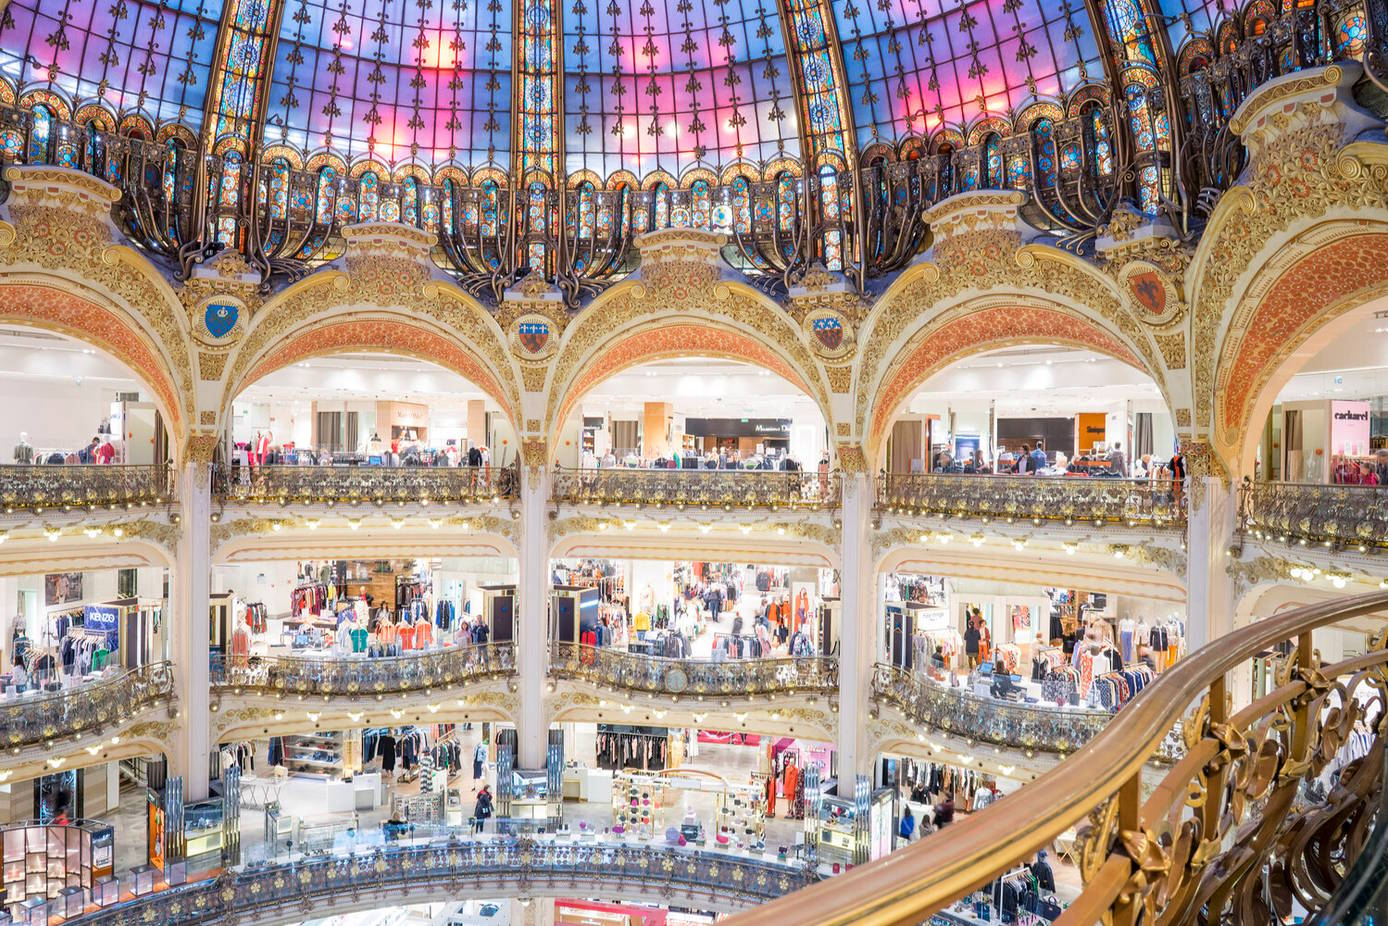 The historic dome of the Galeries Lafayette is being restored